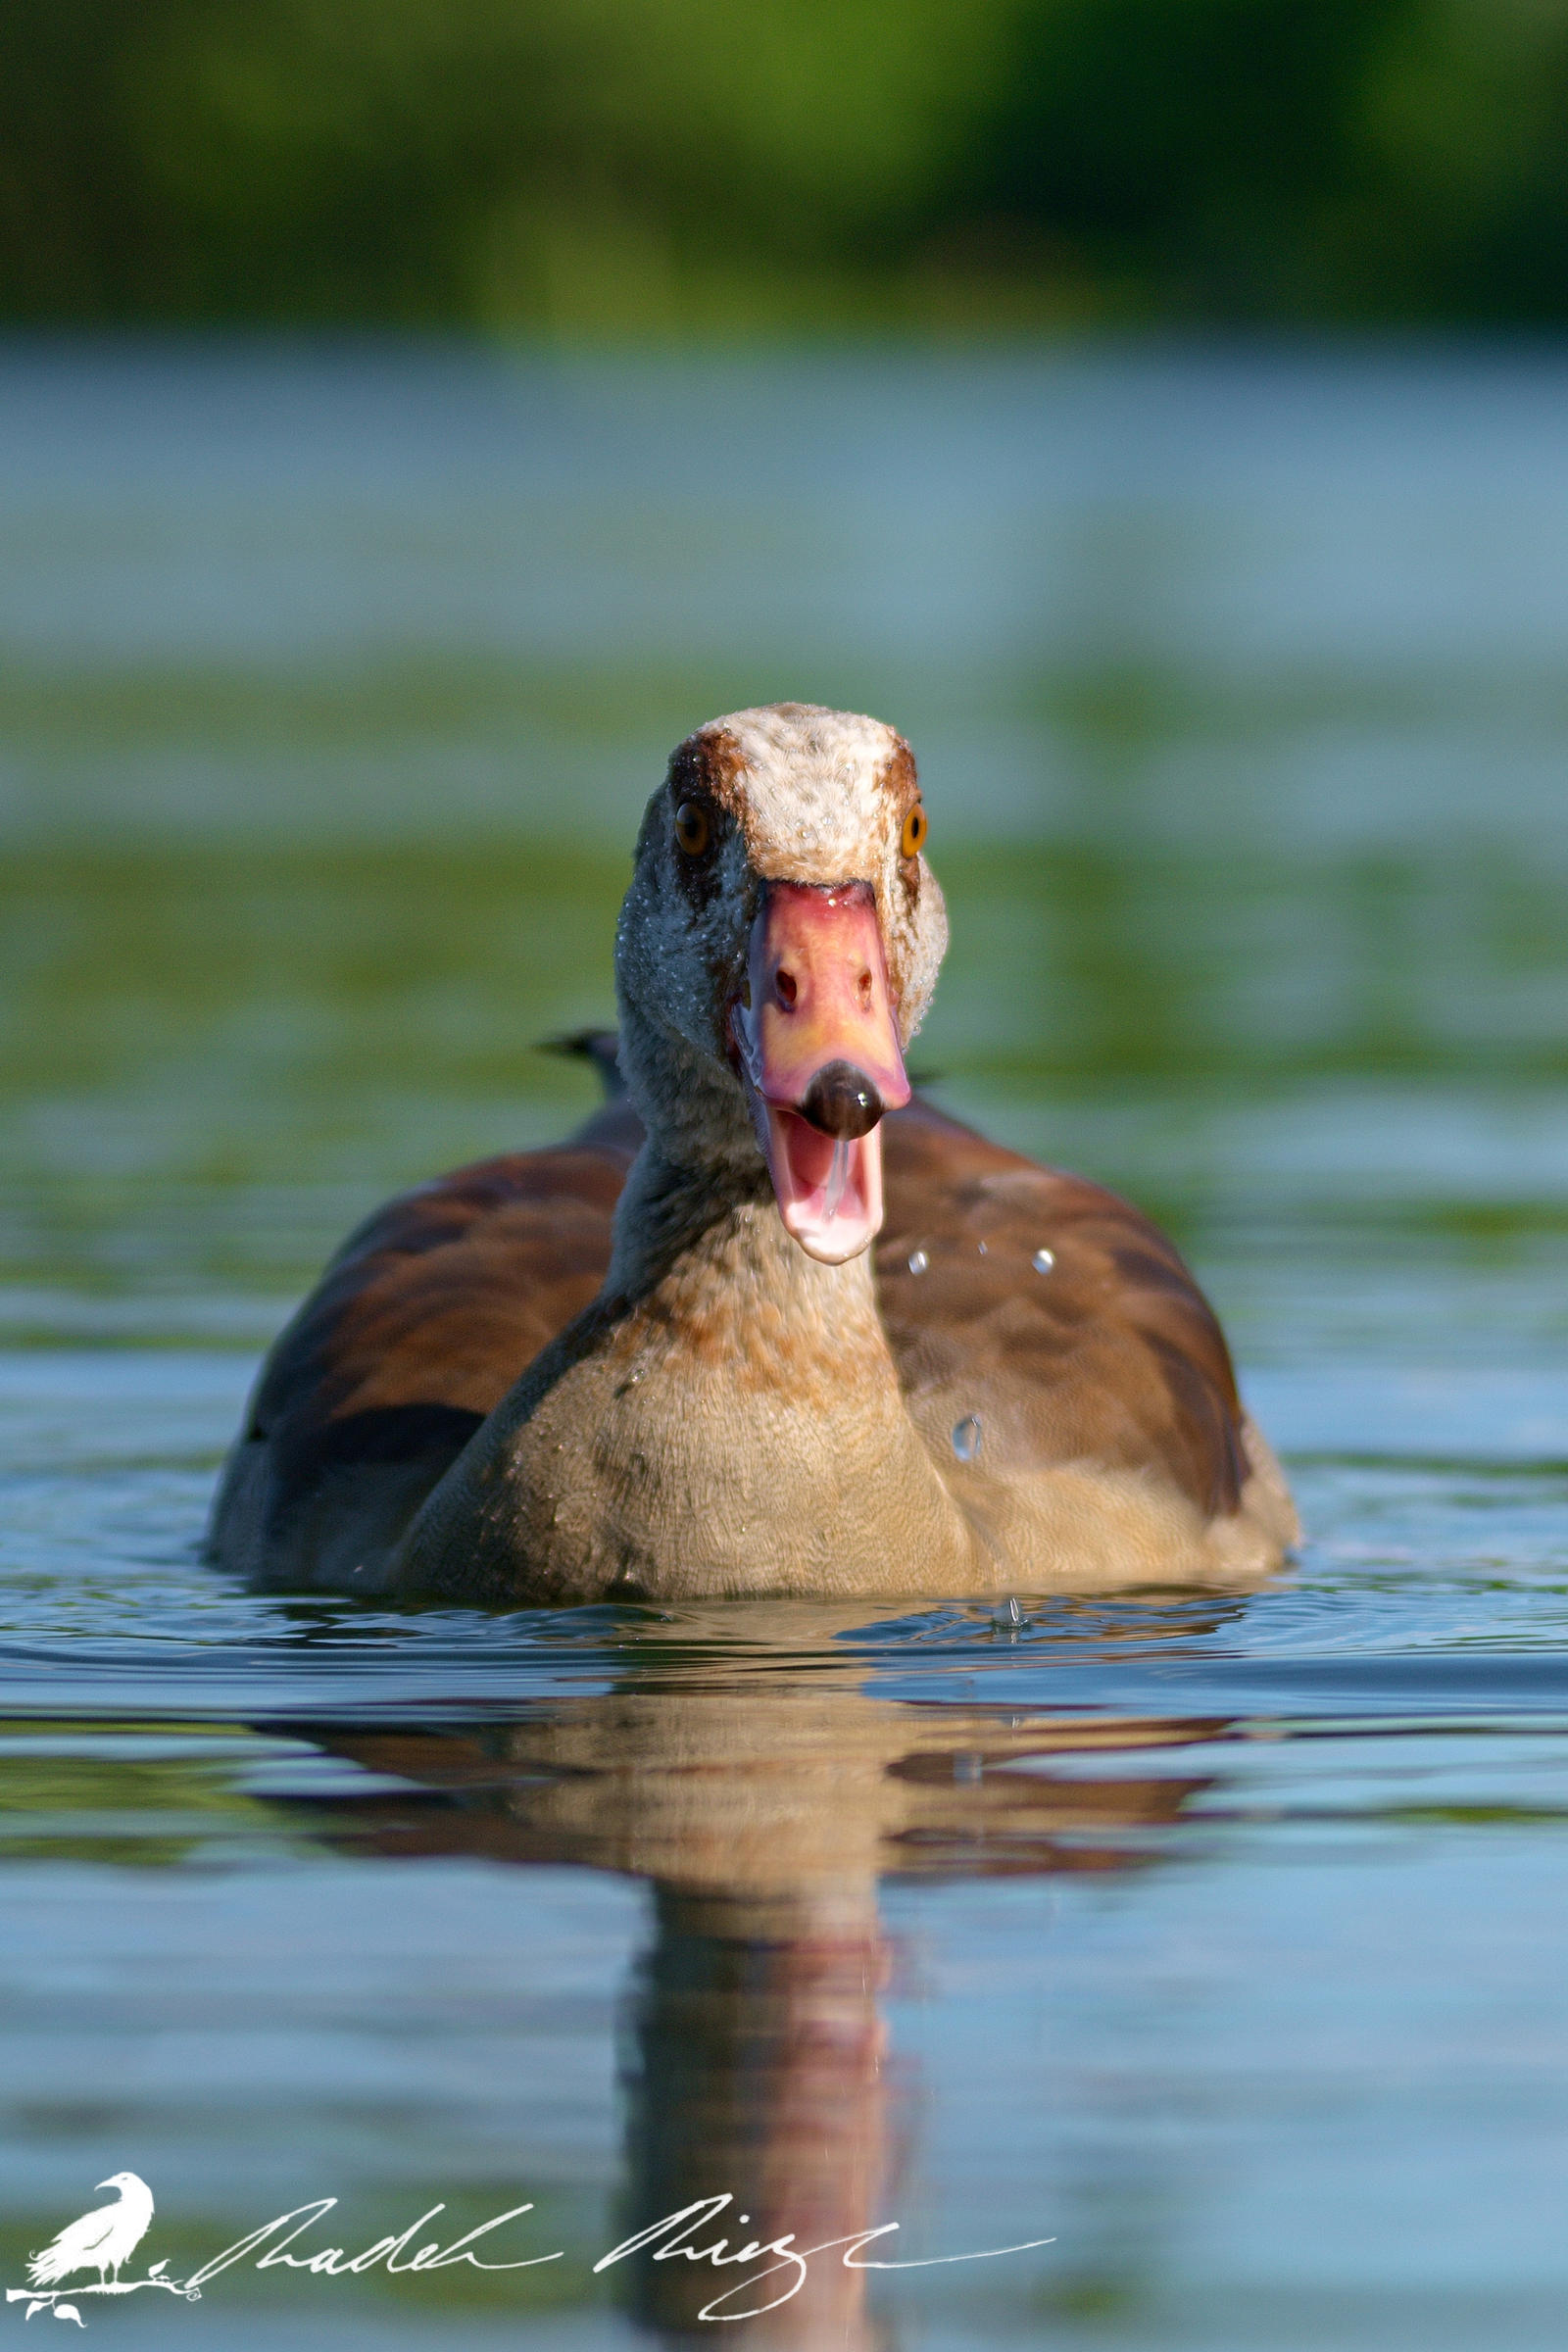 What's up? - Egyptian goose(Alopochen aegyptiacus)